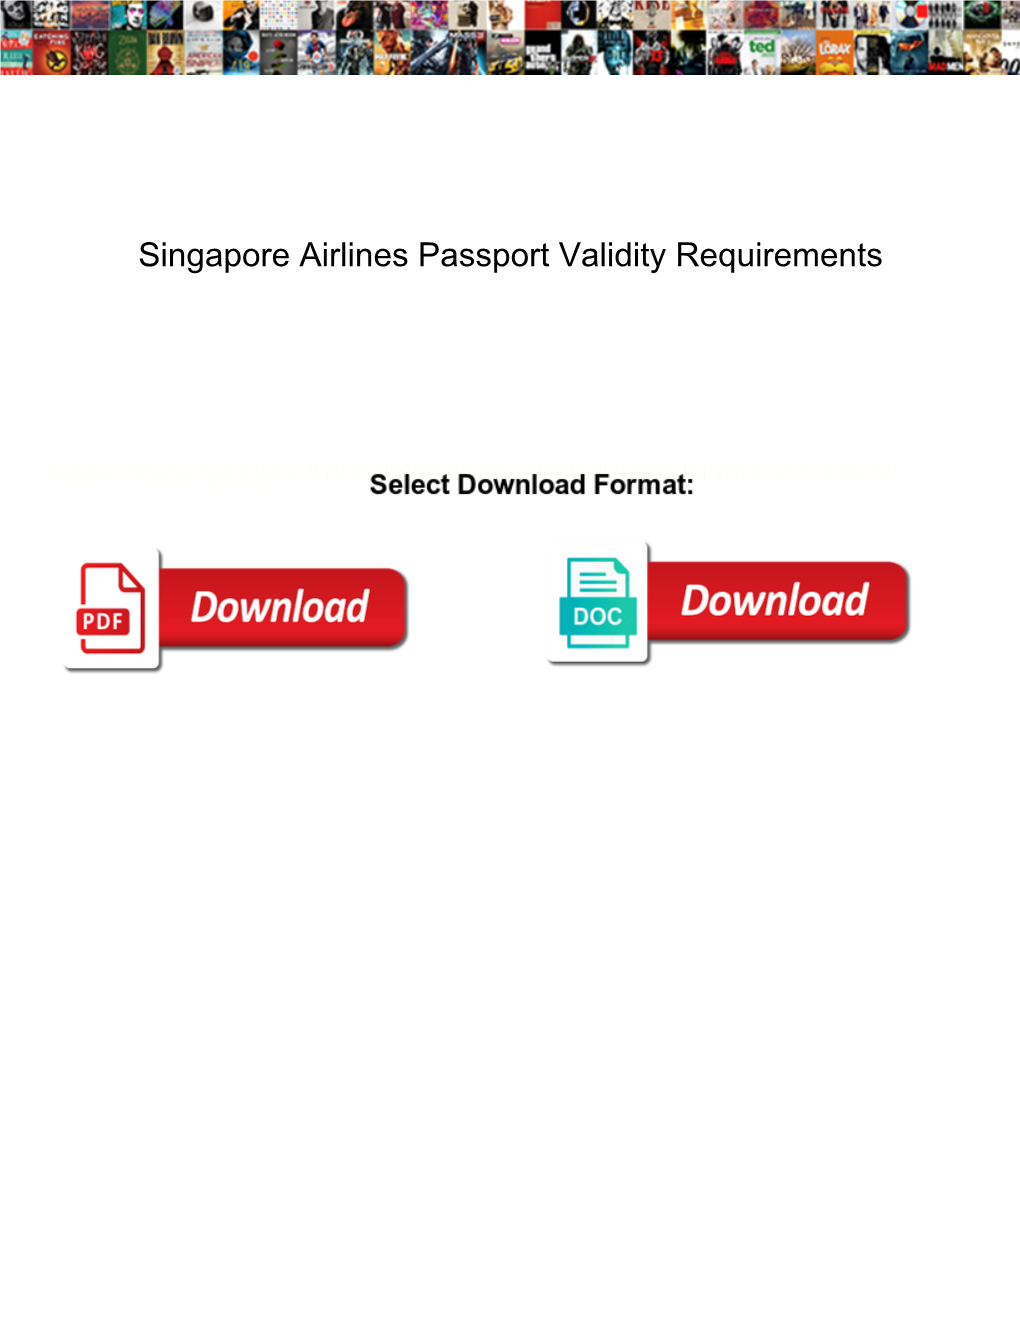 Singapore Airlines Passport Validity Requirements